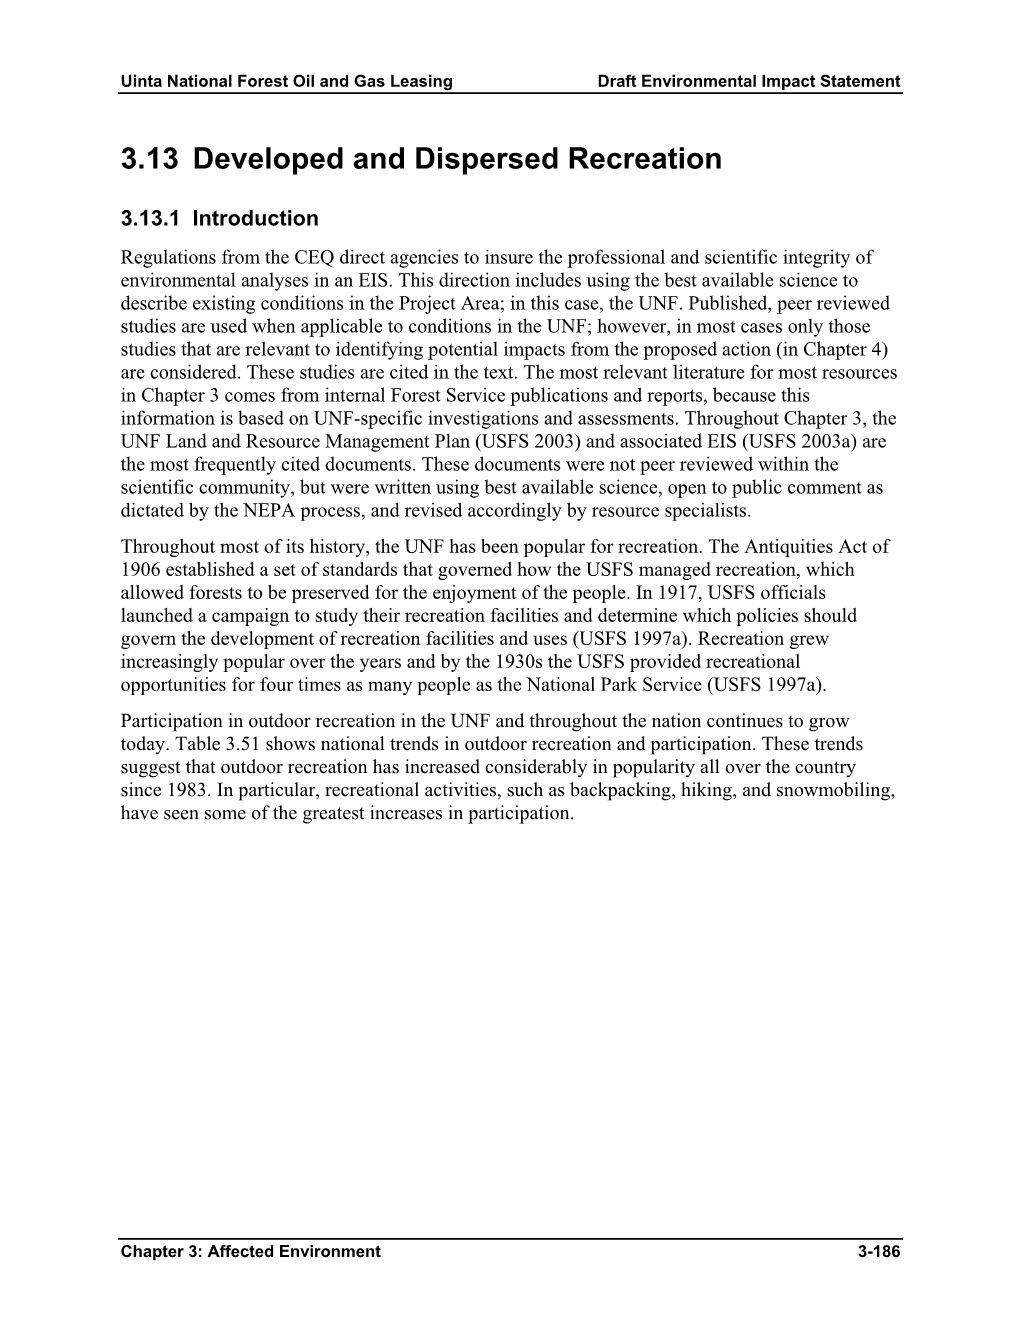 3.13 Developed and Dispersed Recreation